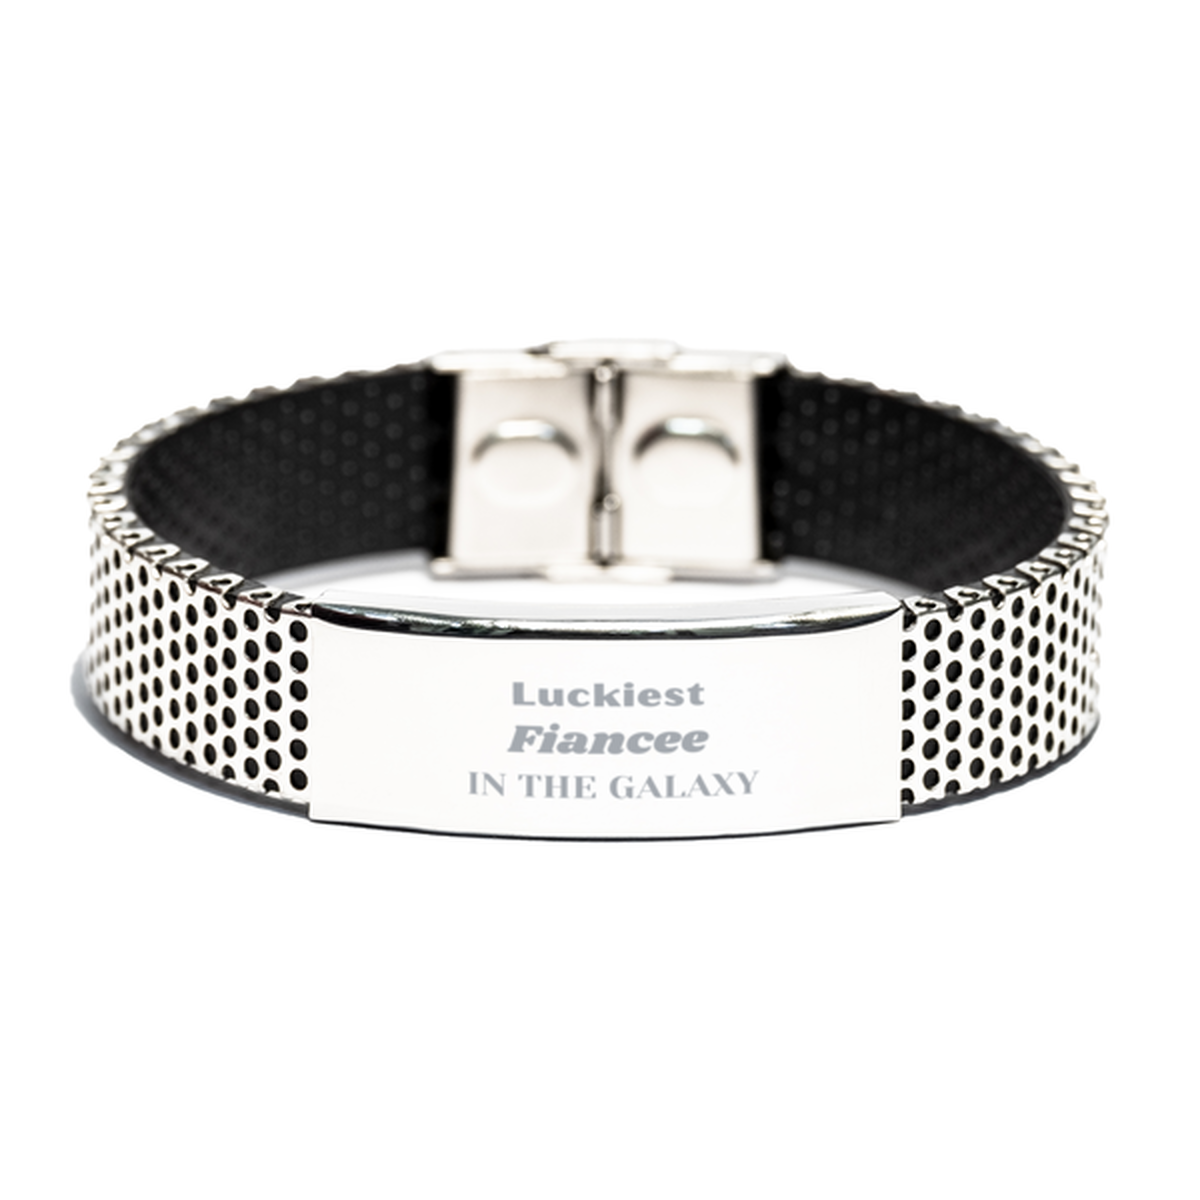 Luckiest Fiancee in the Galaxy, To My Fiancee Engraved Gifts, Christmas Fiancee Stainless Steel Bracelet Gifts, X-mas Birthday Unique Gifts For Fiancee Men Women